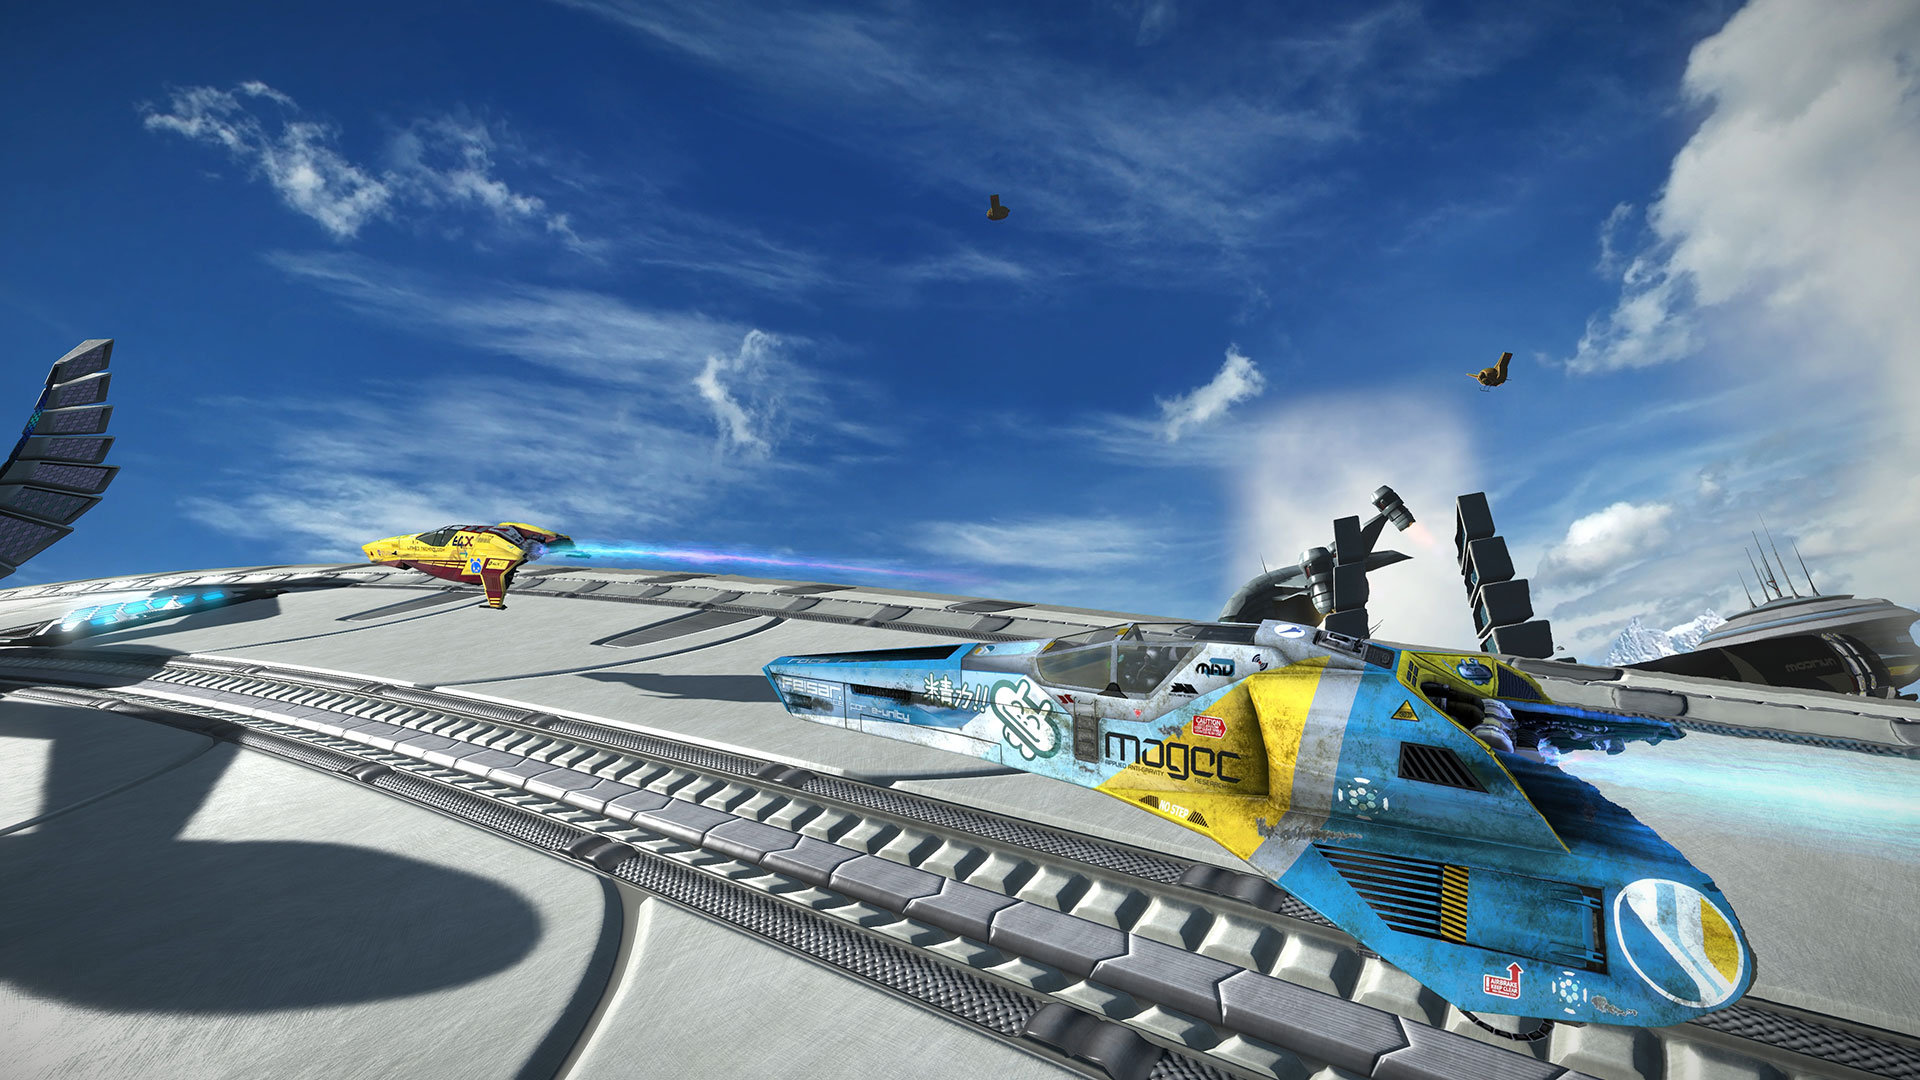 Media asset in full size related to 3dfxzone.it news item entitled as follows: Wipeout Omega Collection: Sony pubblica trailer, screenshots e data di lancio | Image Name: news26090_Wipeout-Omega-Collection_5.jpg